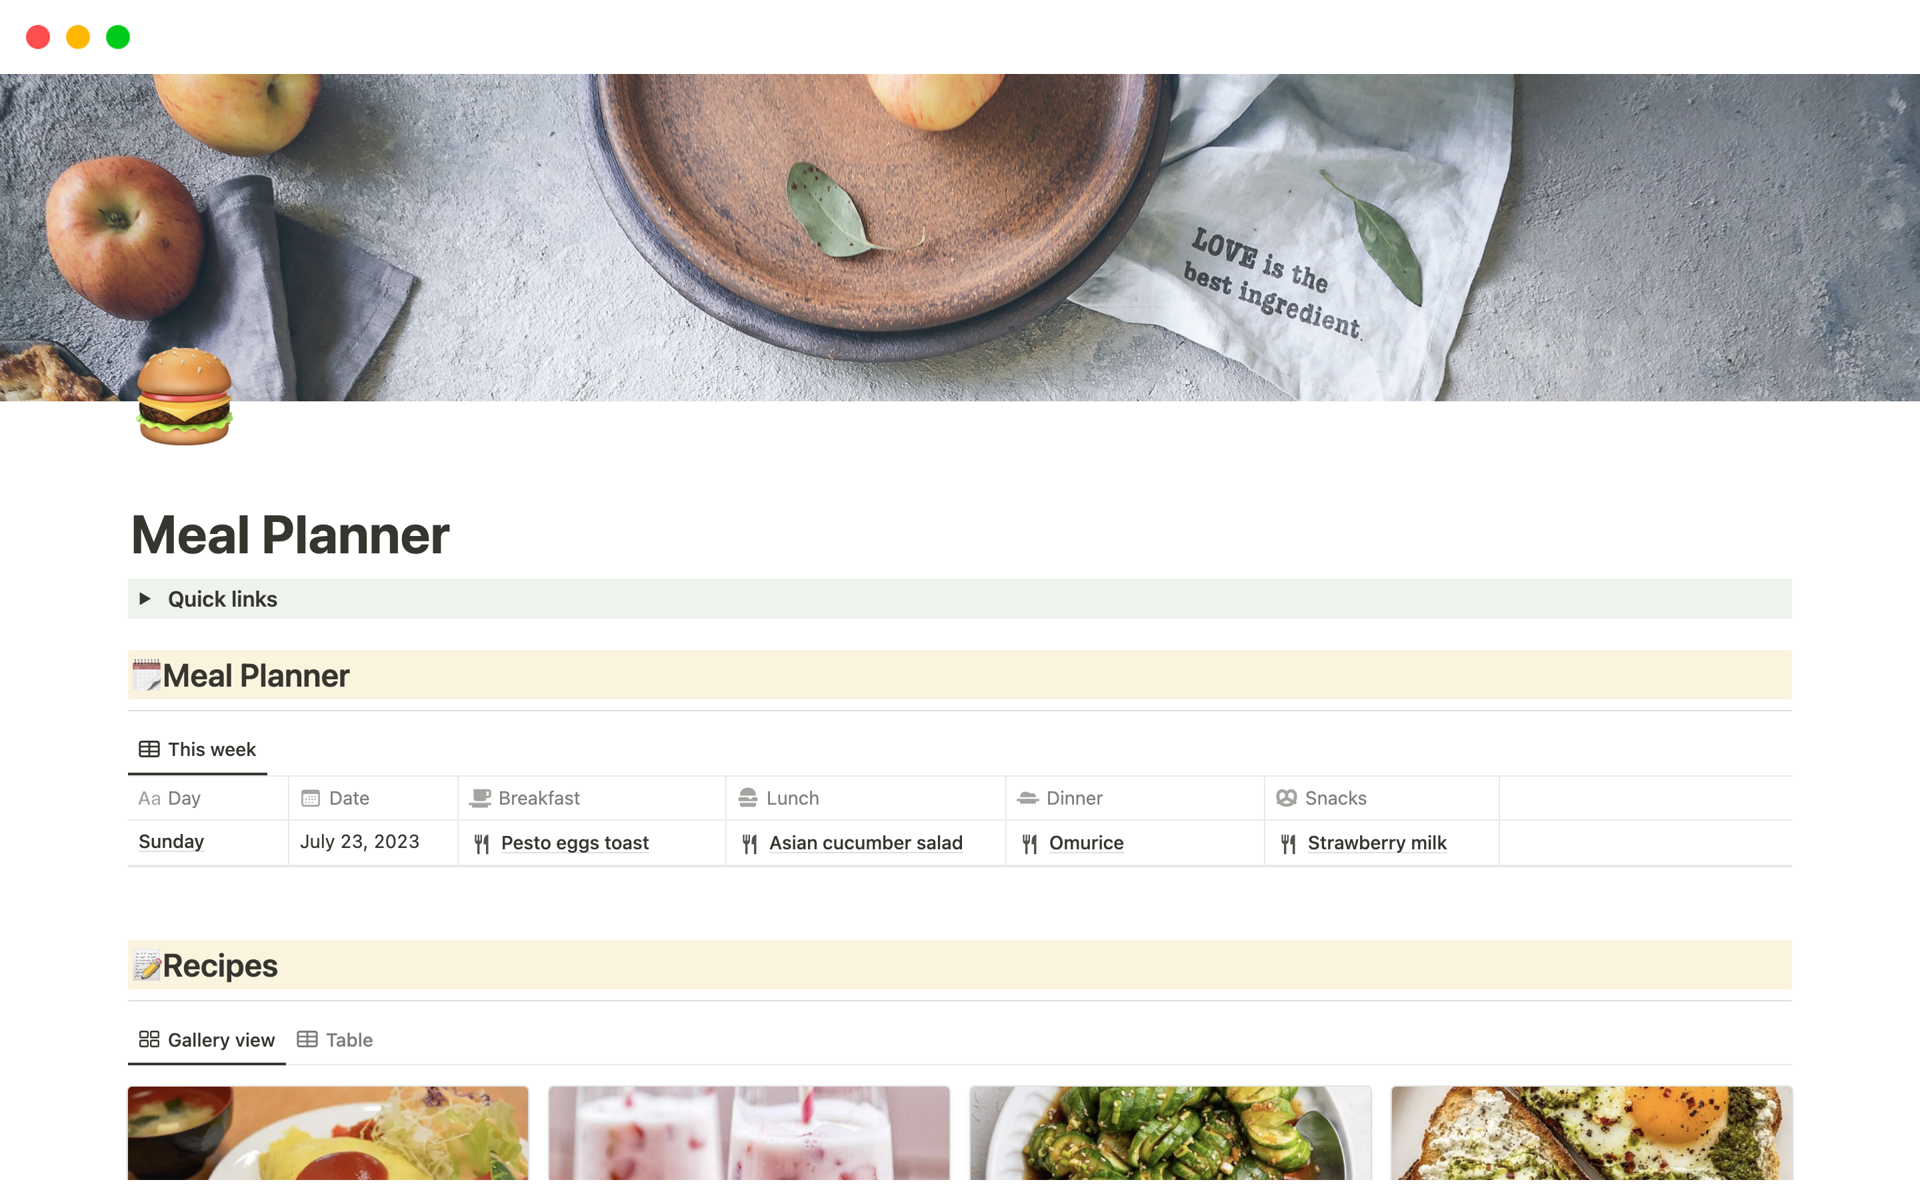 This template is designed to streamline your meal planning process and organize your recipes.